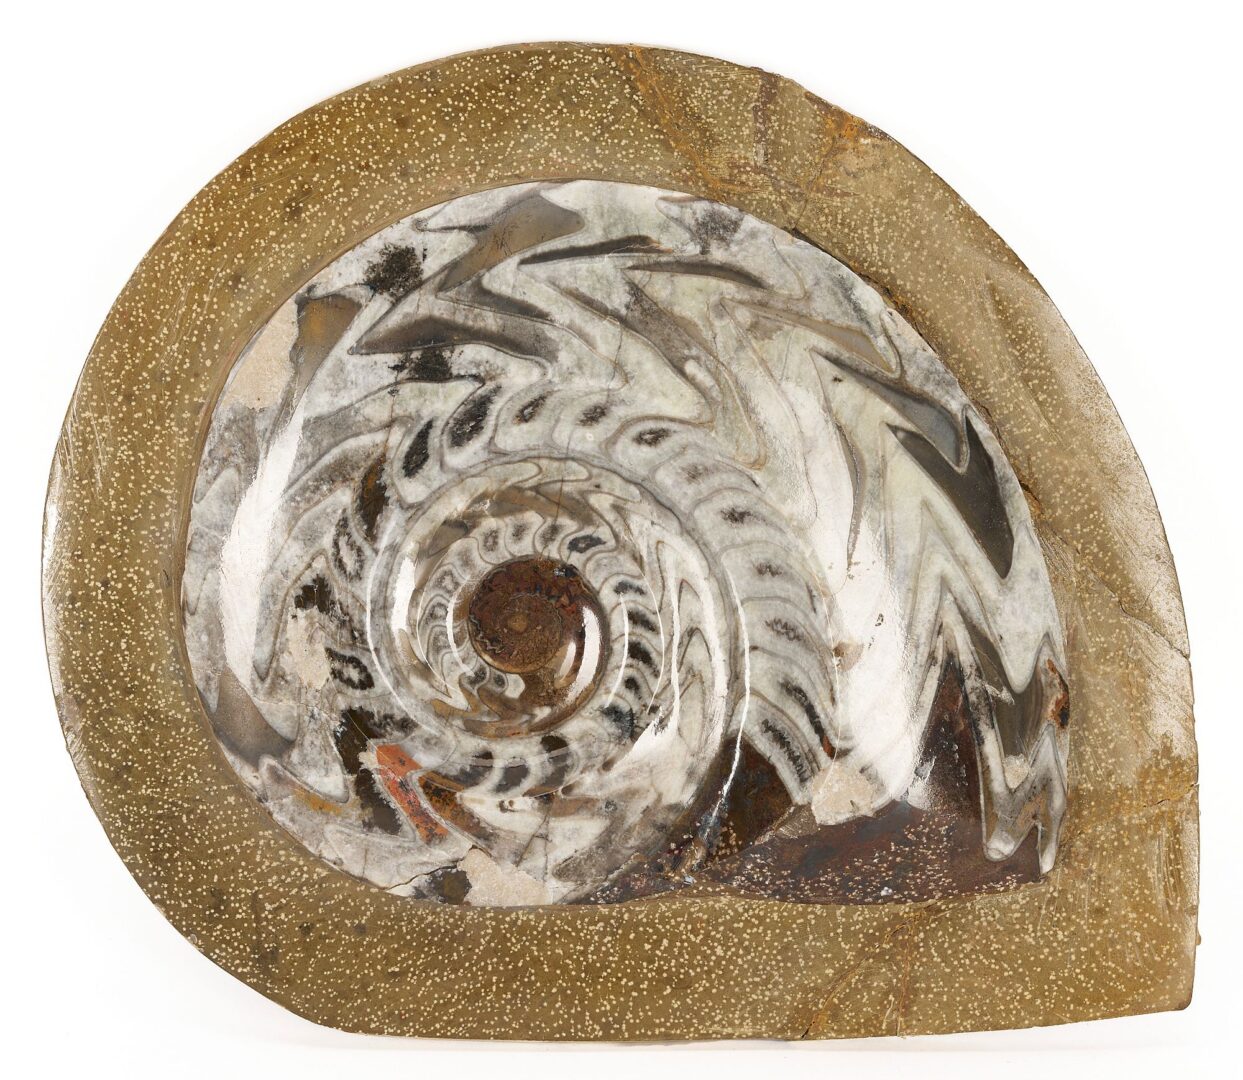 Lot 977: Fossil Collection incl. Ammonoid & Framed Display